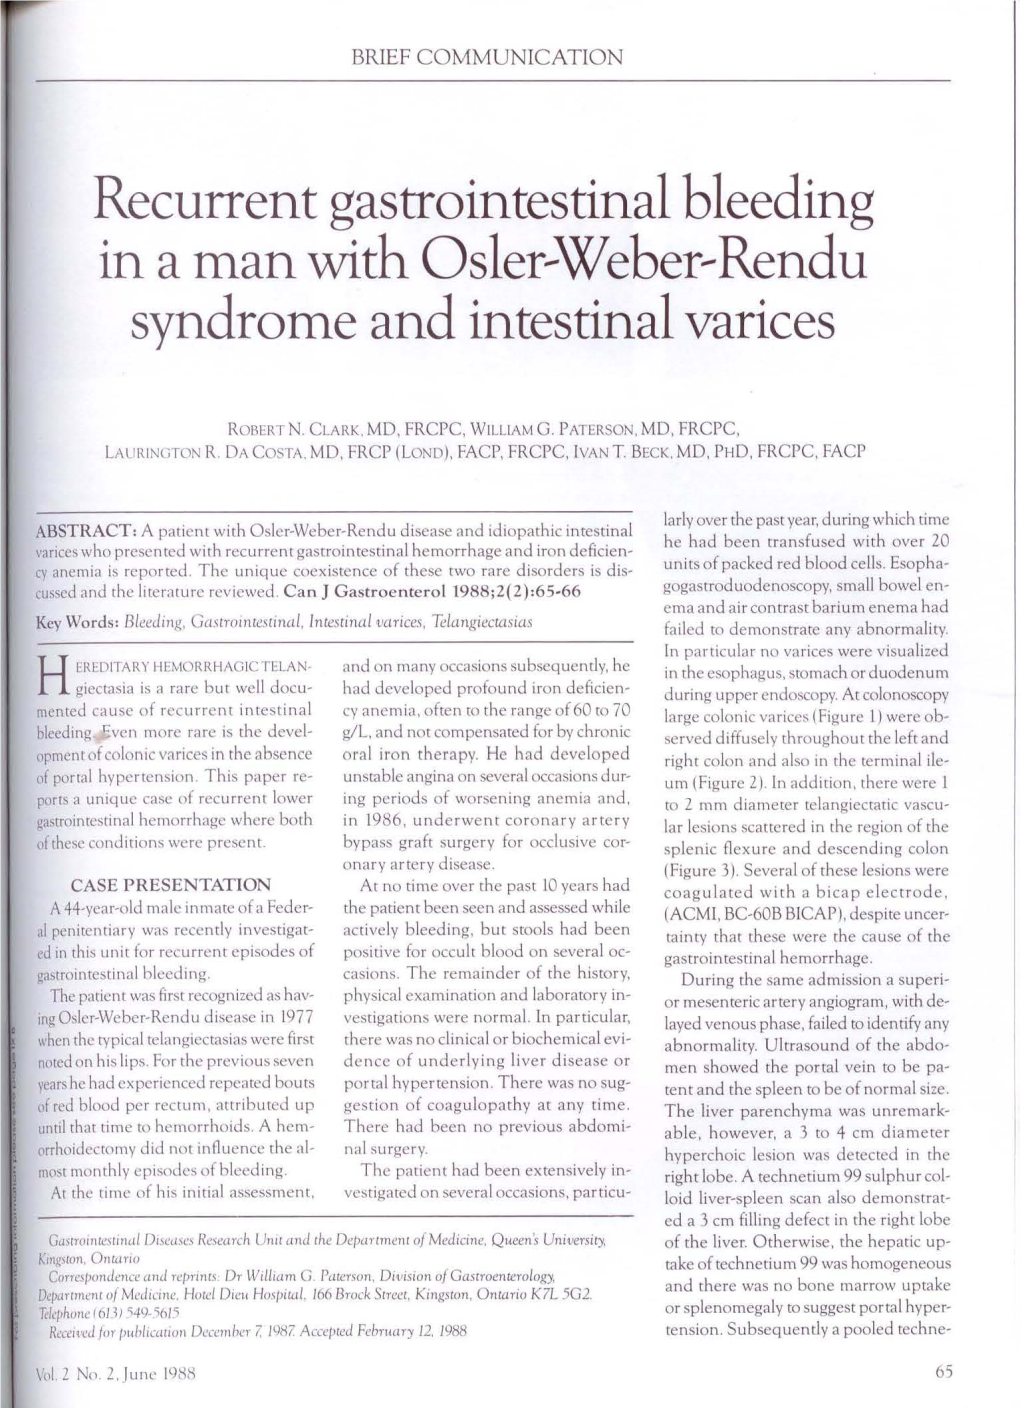 In a Itlan with Osler-Weber-Rendu Syndrome and Intestinal Varices